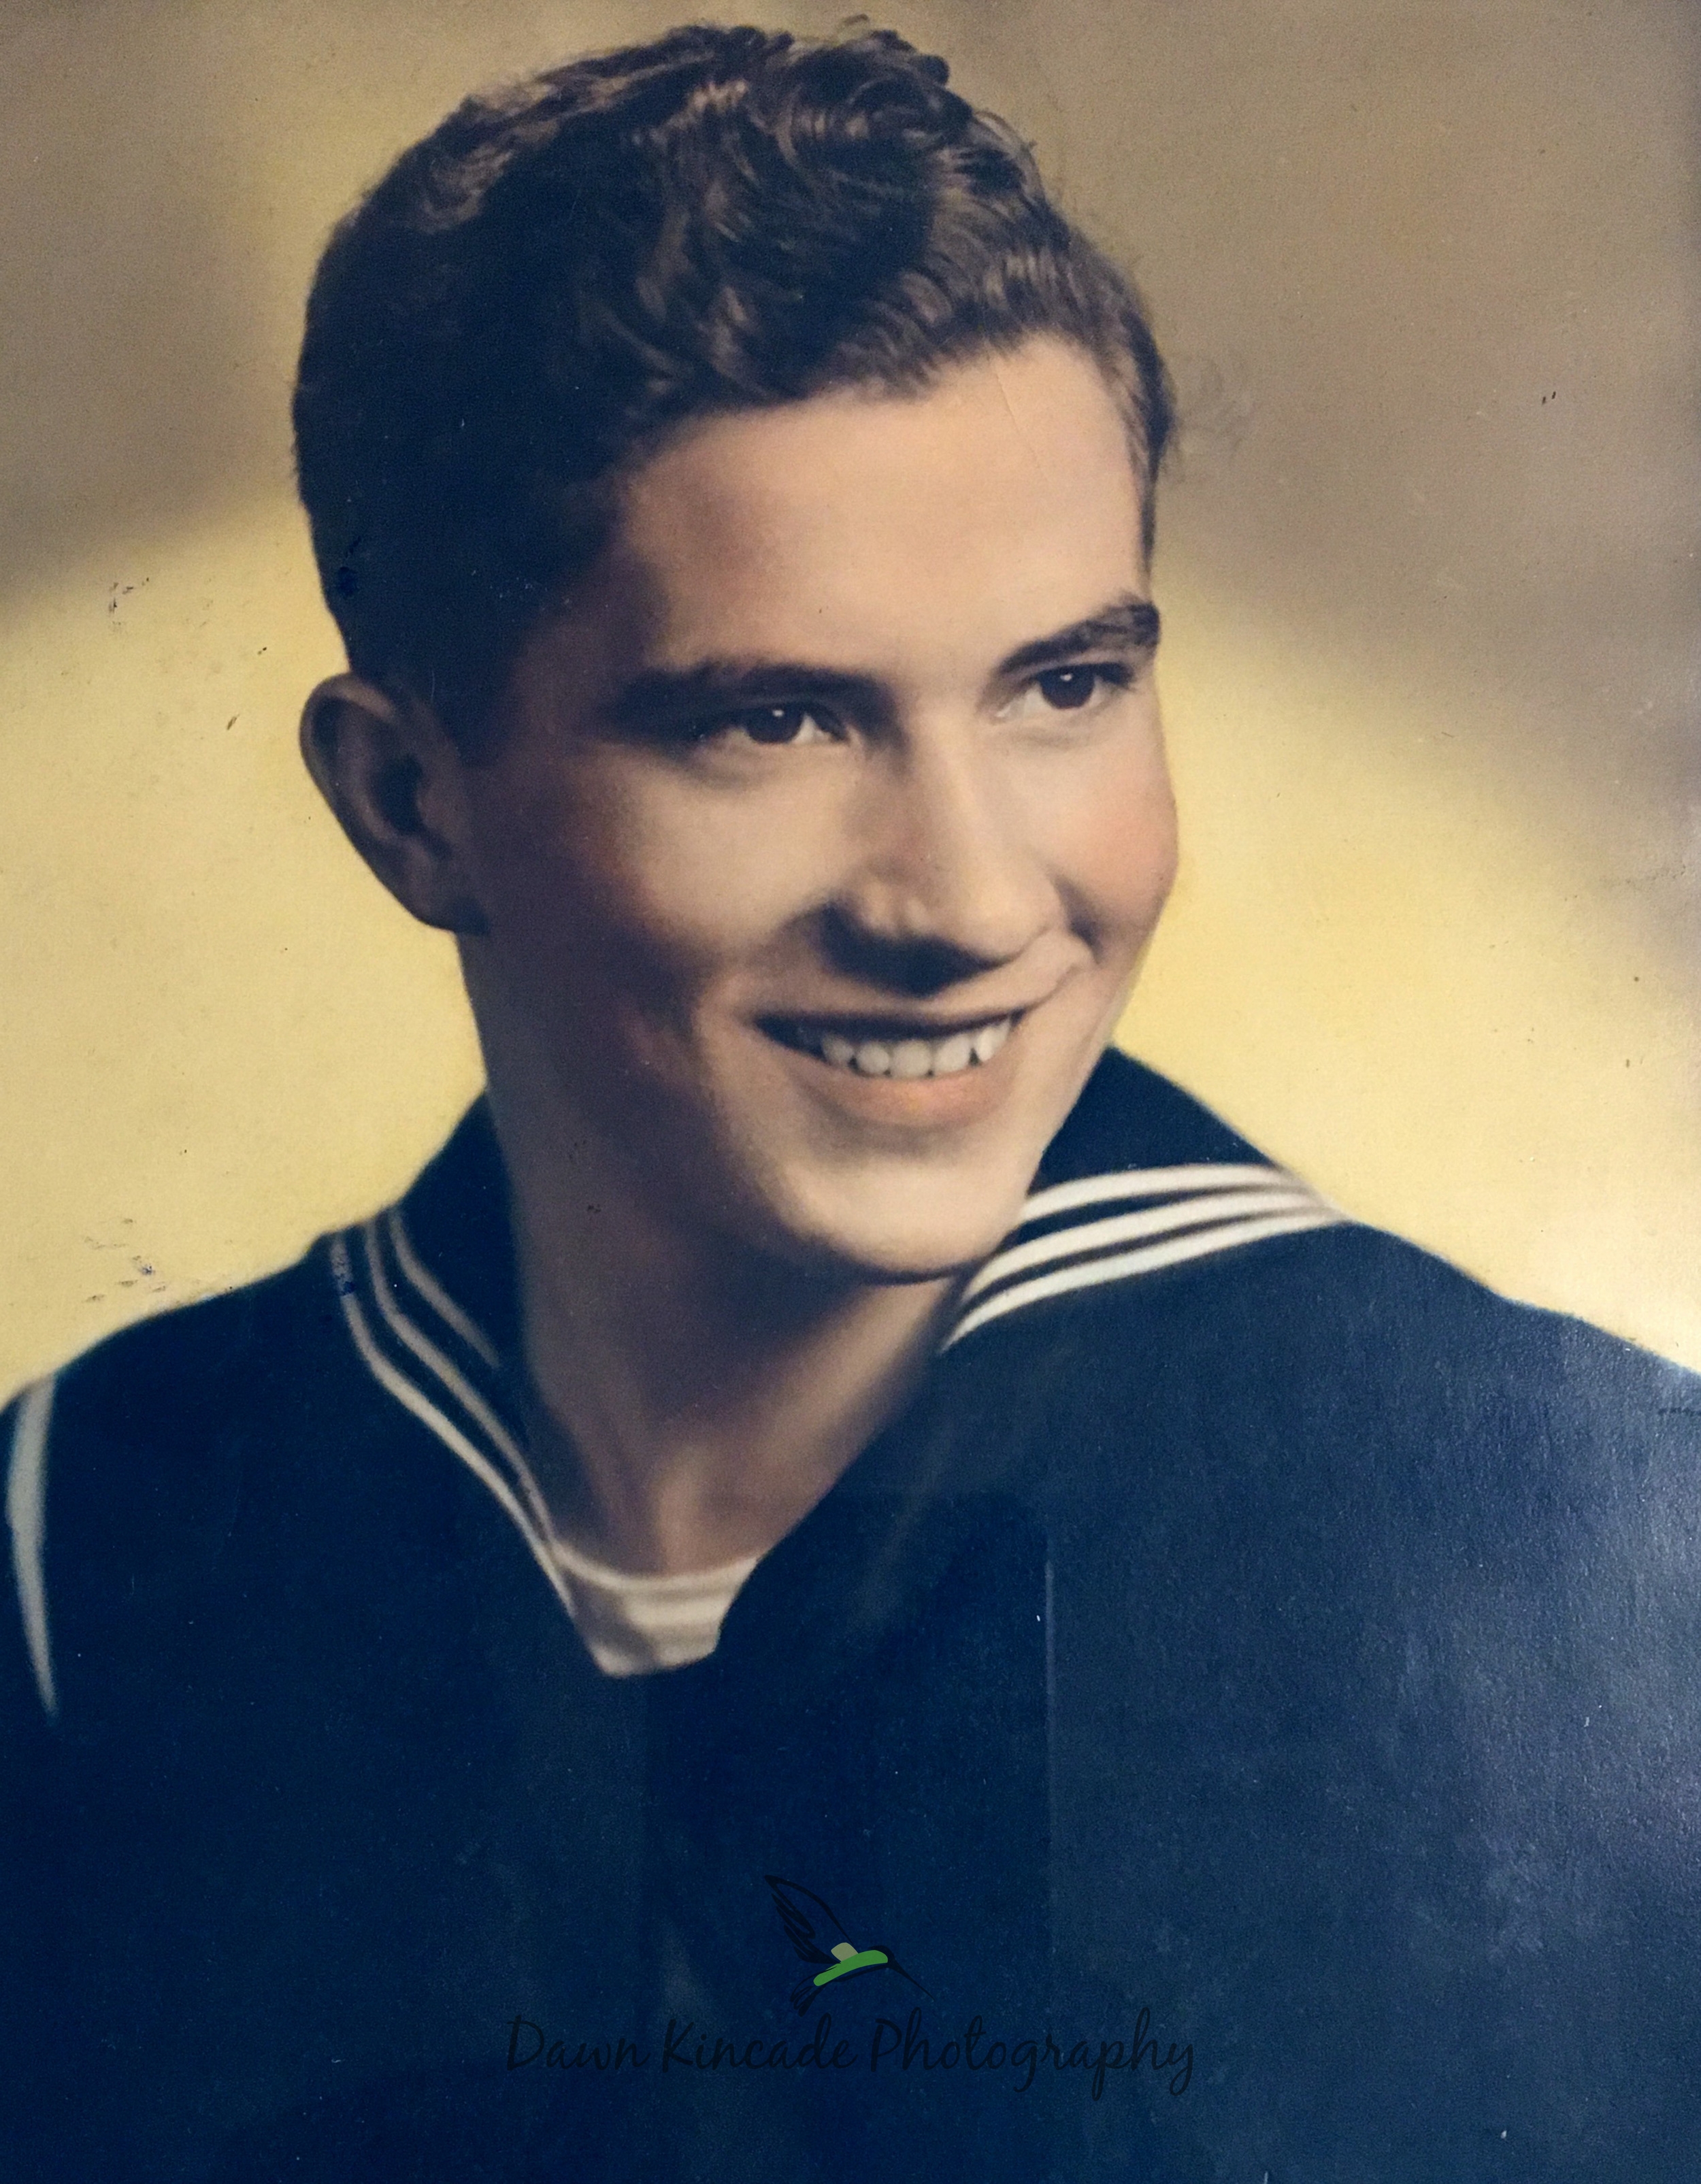 My Dad's Navy snapshot. This is not my photo but a scanned copy. Photo credit to the Navy.